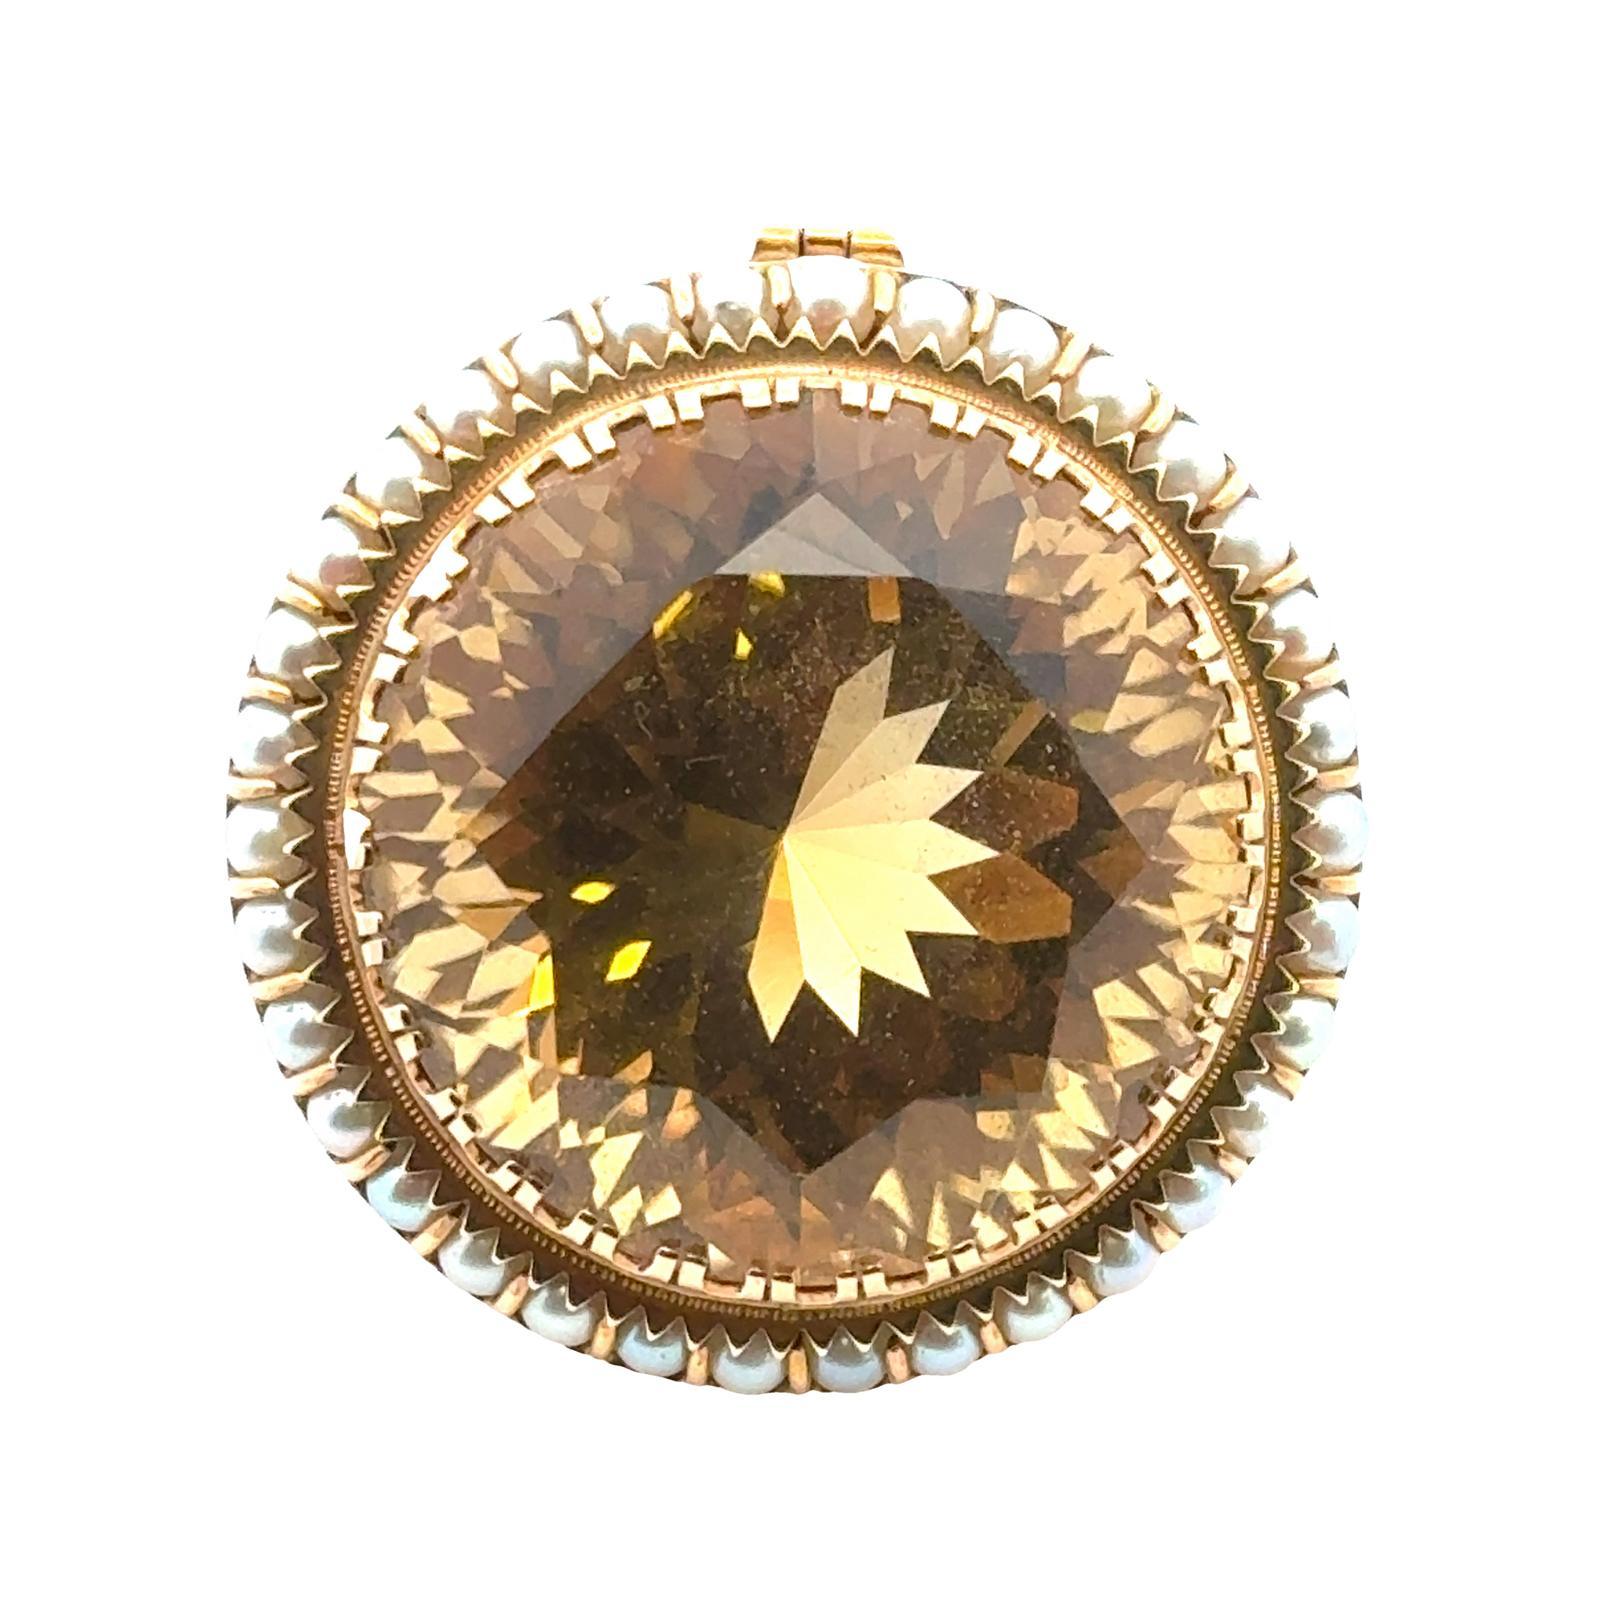 The centerpiece of the brooch is a magnificant round faceted ctirine gemstone radiating with a warm golden hue that captures the eye and adds a touch of sunshine to any ensemble. Surrounding the citrine is a delicate halo of lustrous white seed